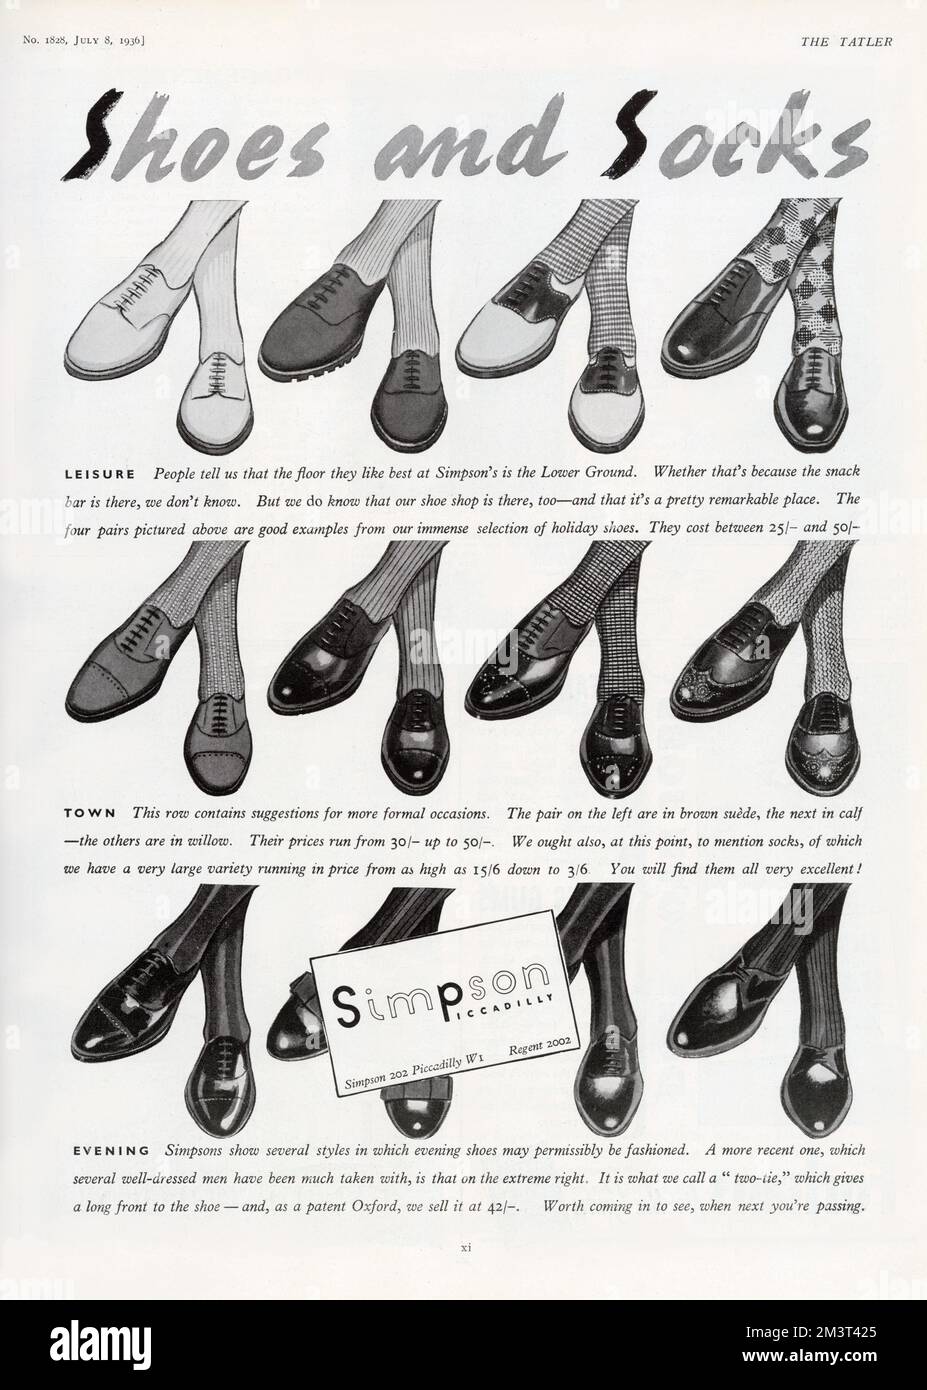 A natty selection of shoes and socks for men for leisure, town and evening wear, available from that arbiter of classic masculine style, Simpson of Piccadilly (now Waterstone's). Stock Photo